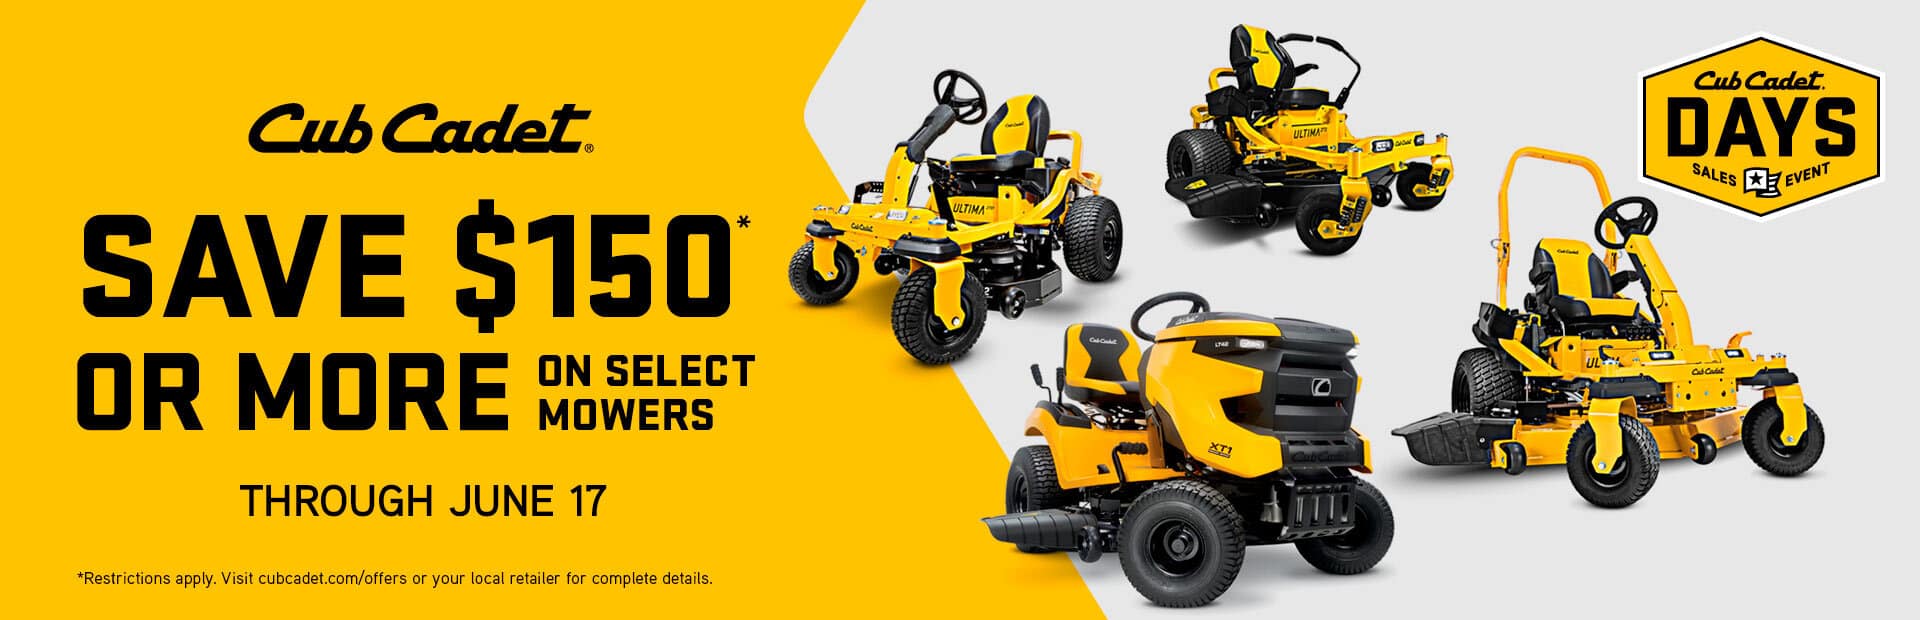 save 150 or more on select mowers with cub cadet days at cub cadet dealership